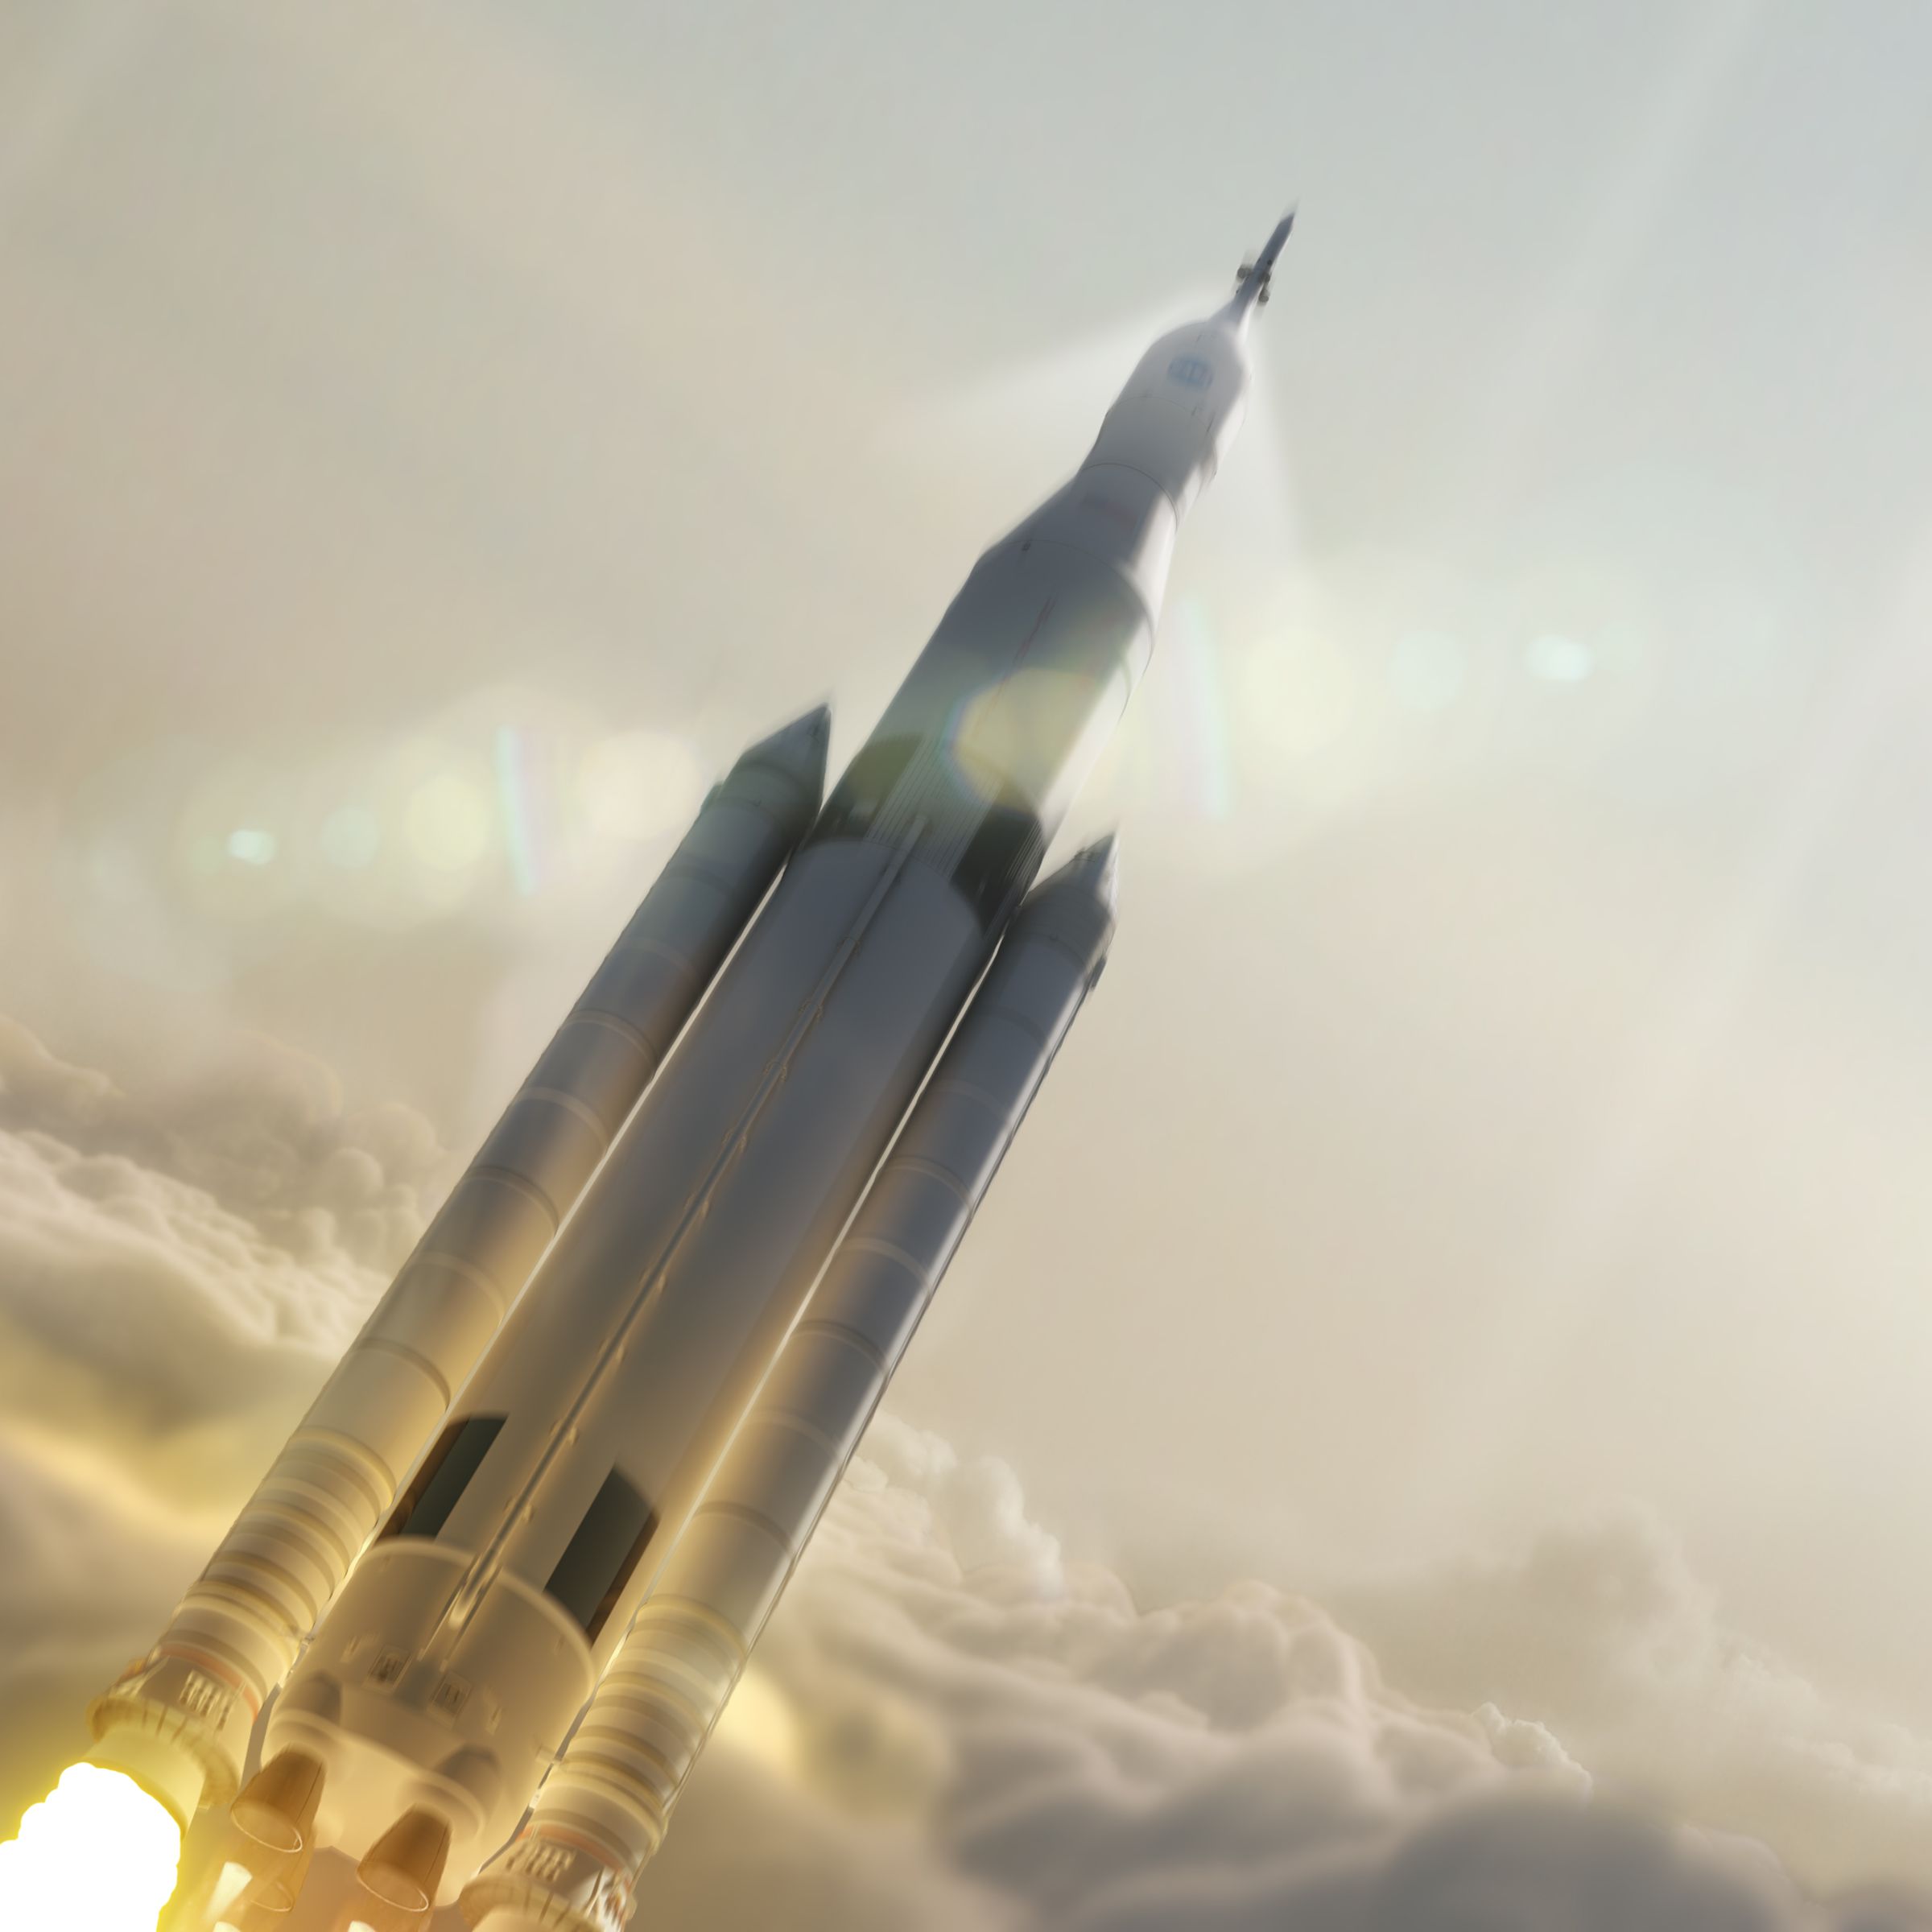 Artist's rendering of NASA's Space Launch System, a new rocket that will be the largest built at 380 feet tall